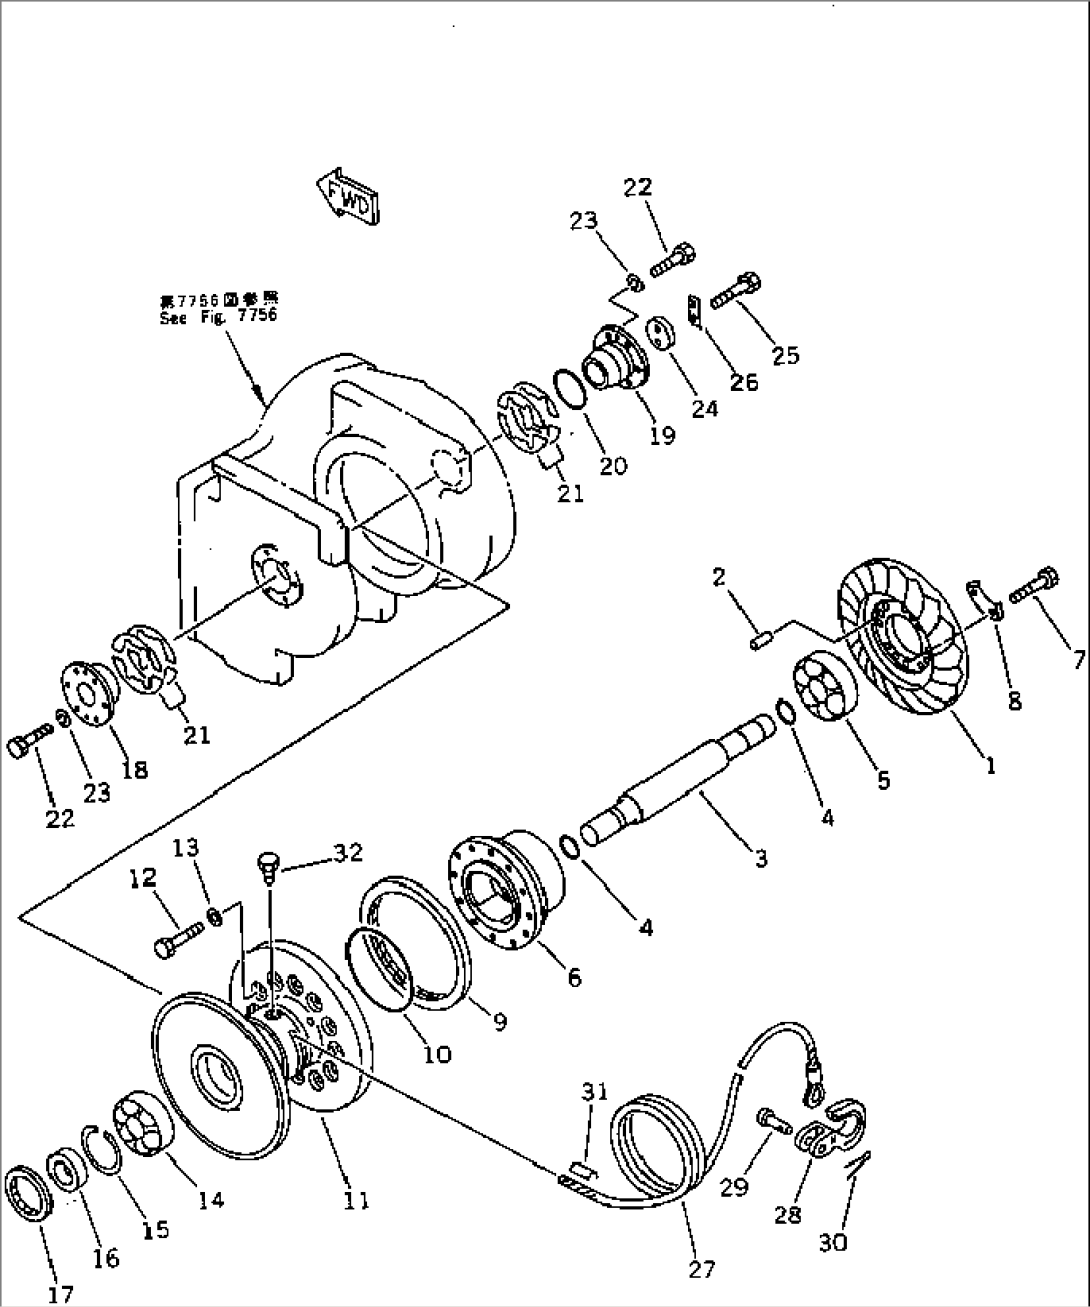 TOWING WINCH (BEVEL GEAR¤ DRUM AND WIRE ROPE)